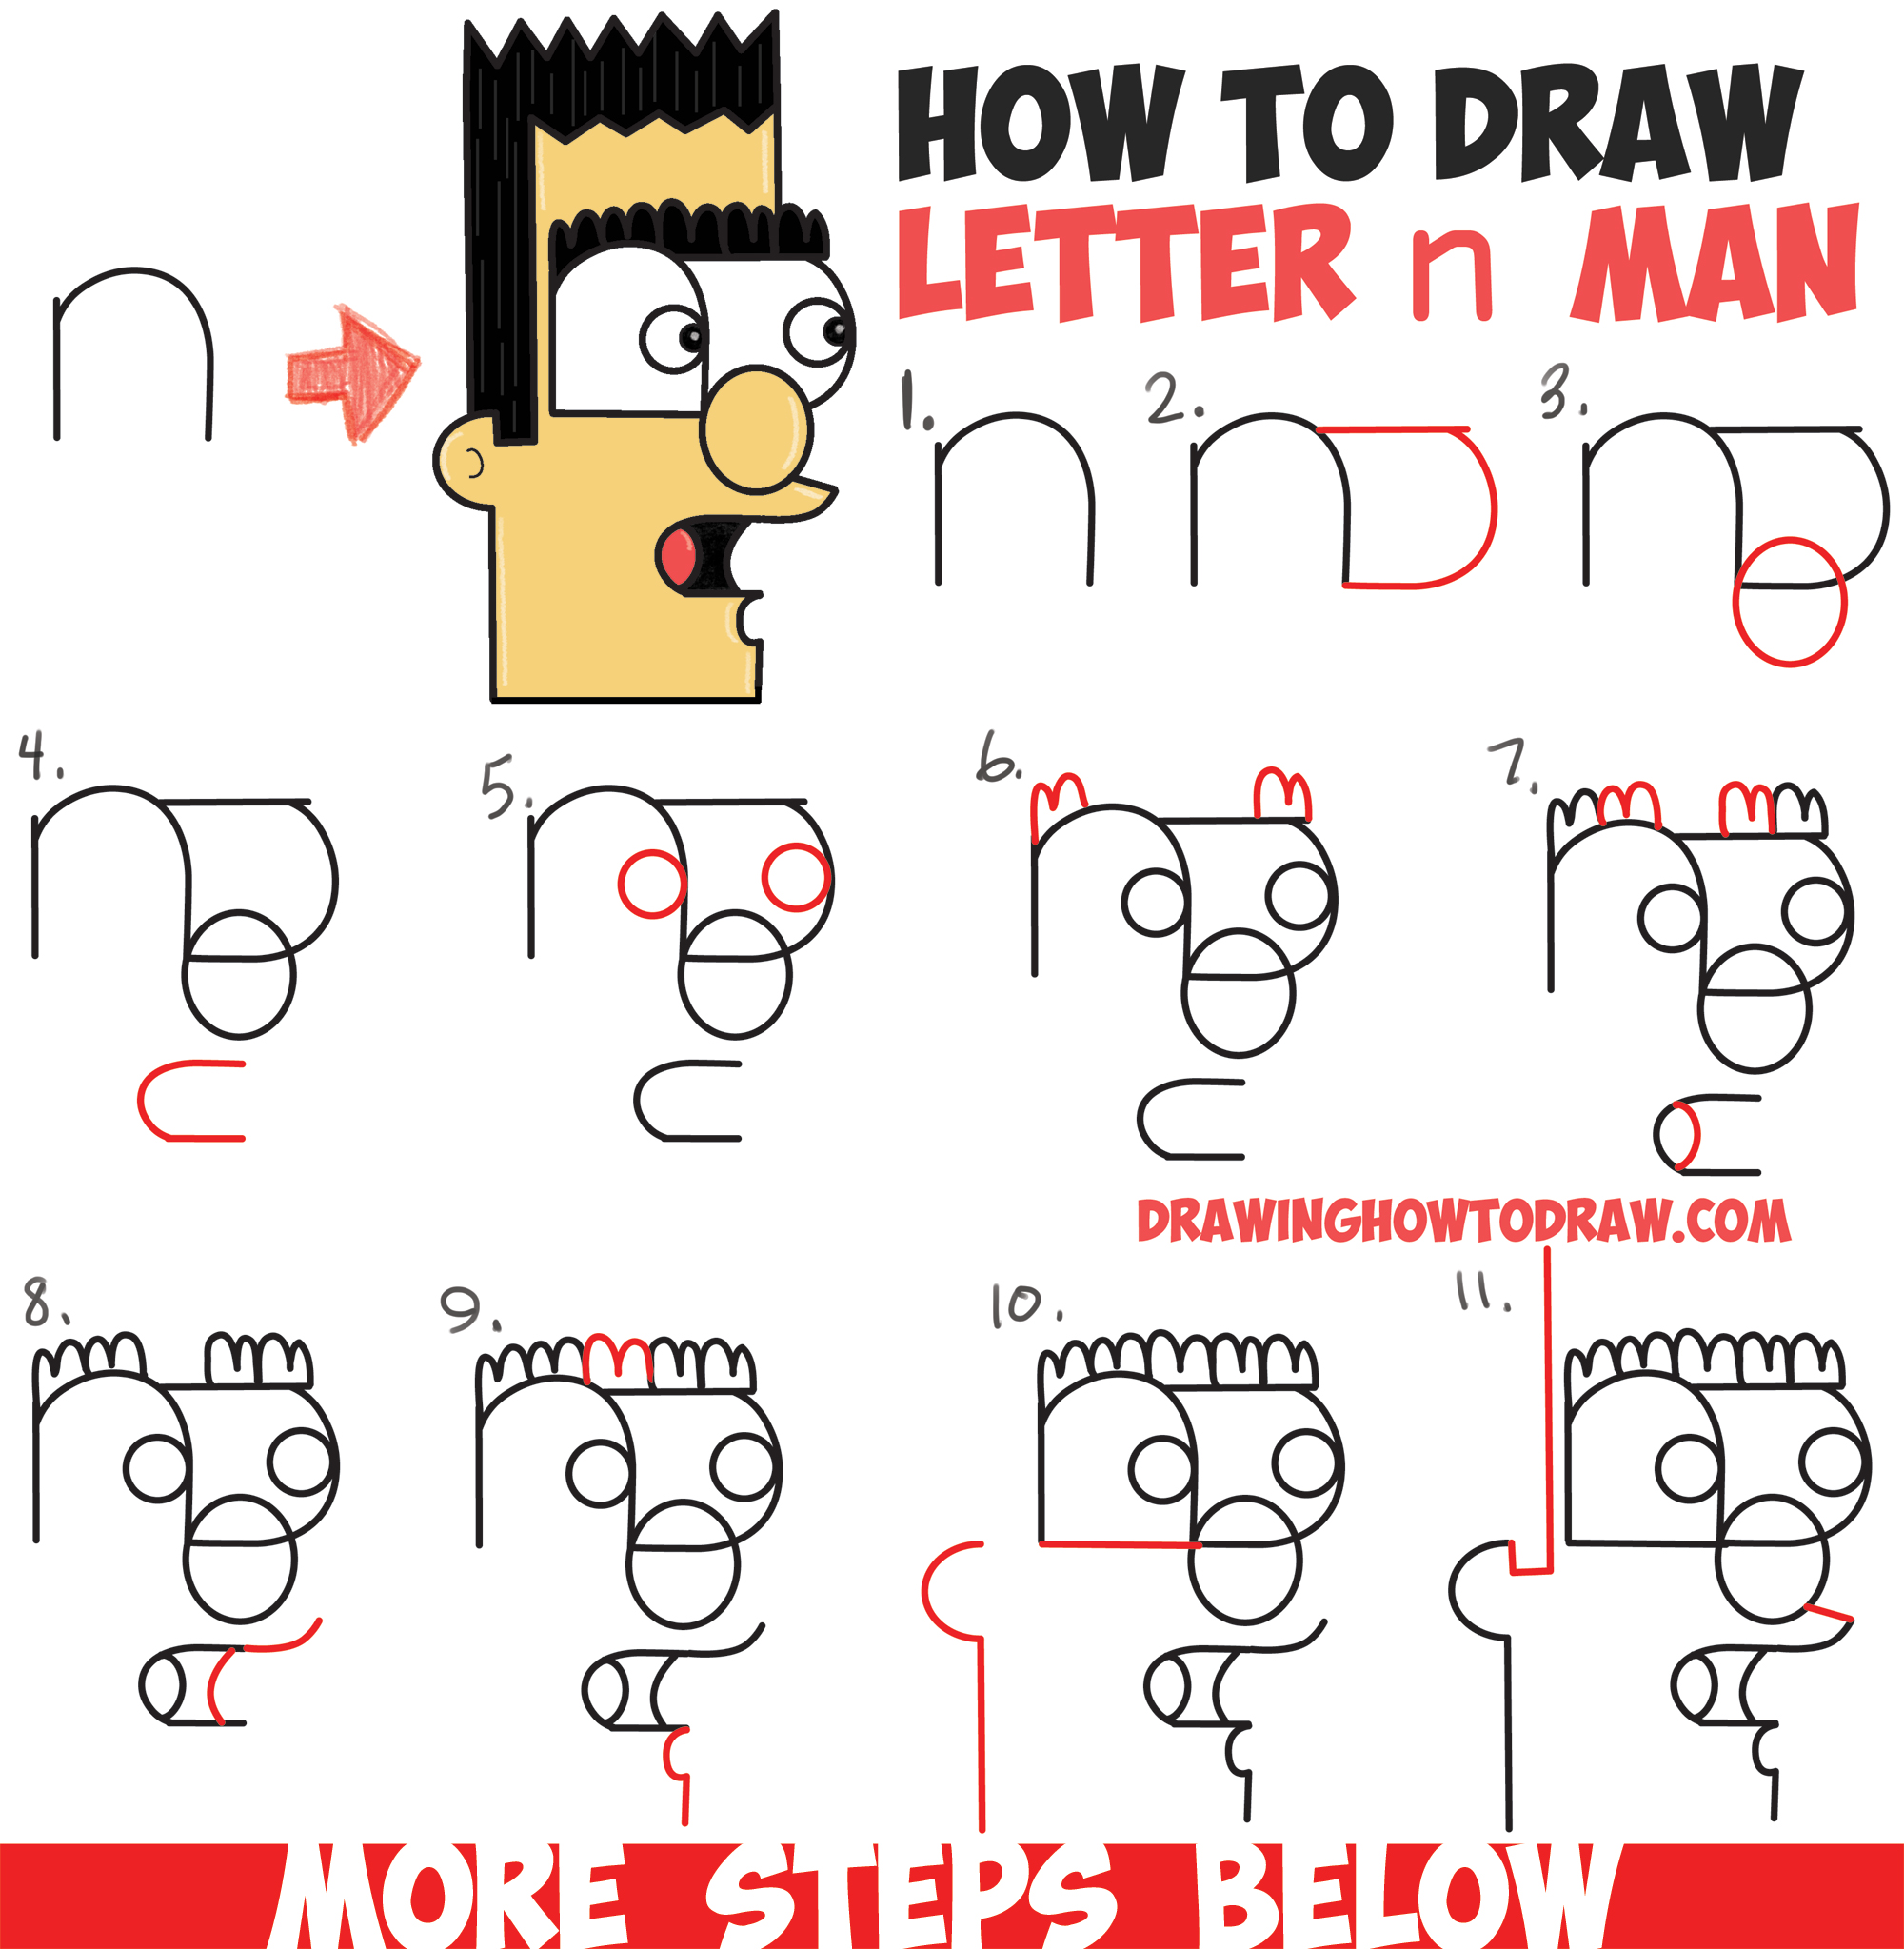 How to Draw a Cartoon Man from Lowercase Letter n in Easy Steps Drawing Lesson for Kids